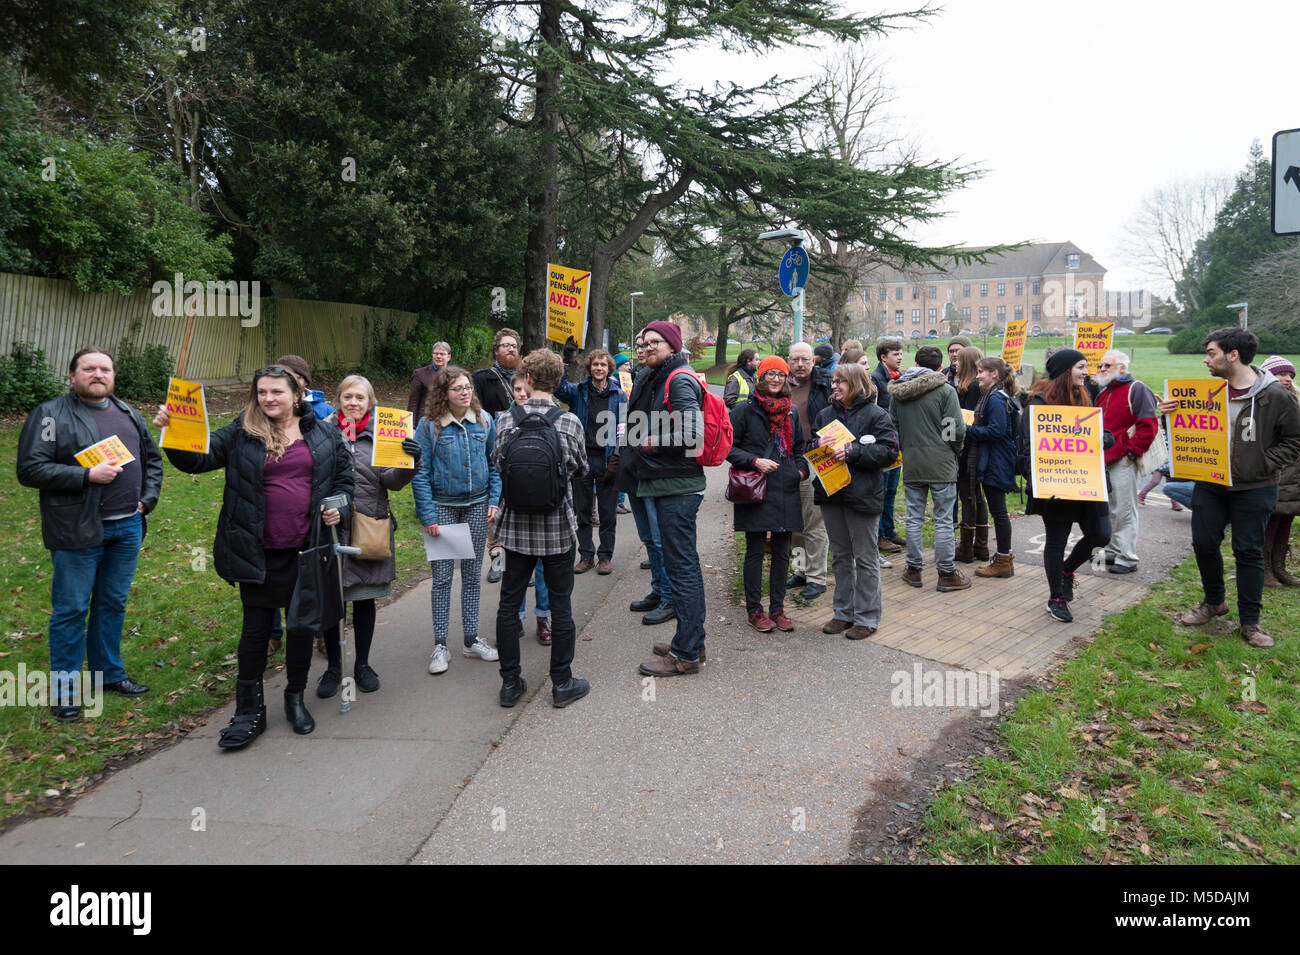 Exeter, Devon, UK. 22nd February, 2018. University teaching staff from the University and College Union (UCU) form a picket line outside the University of Exeter as they strike over pension disputes. Credit: Theo Moye/Alamy Live News Stock Photo